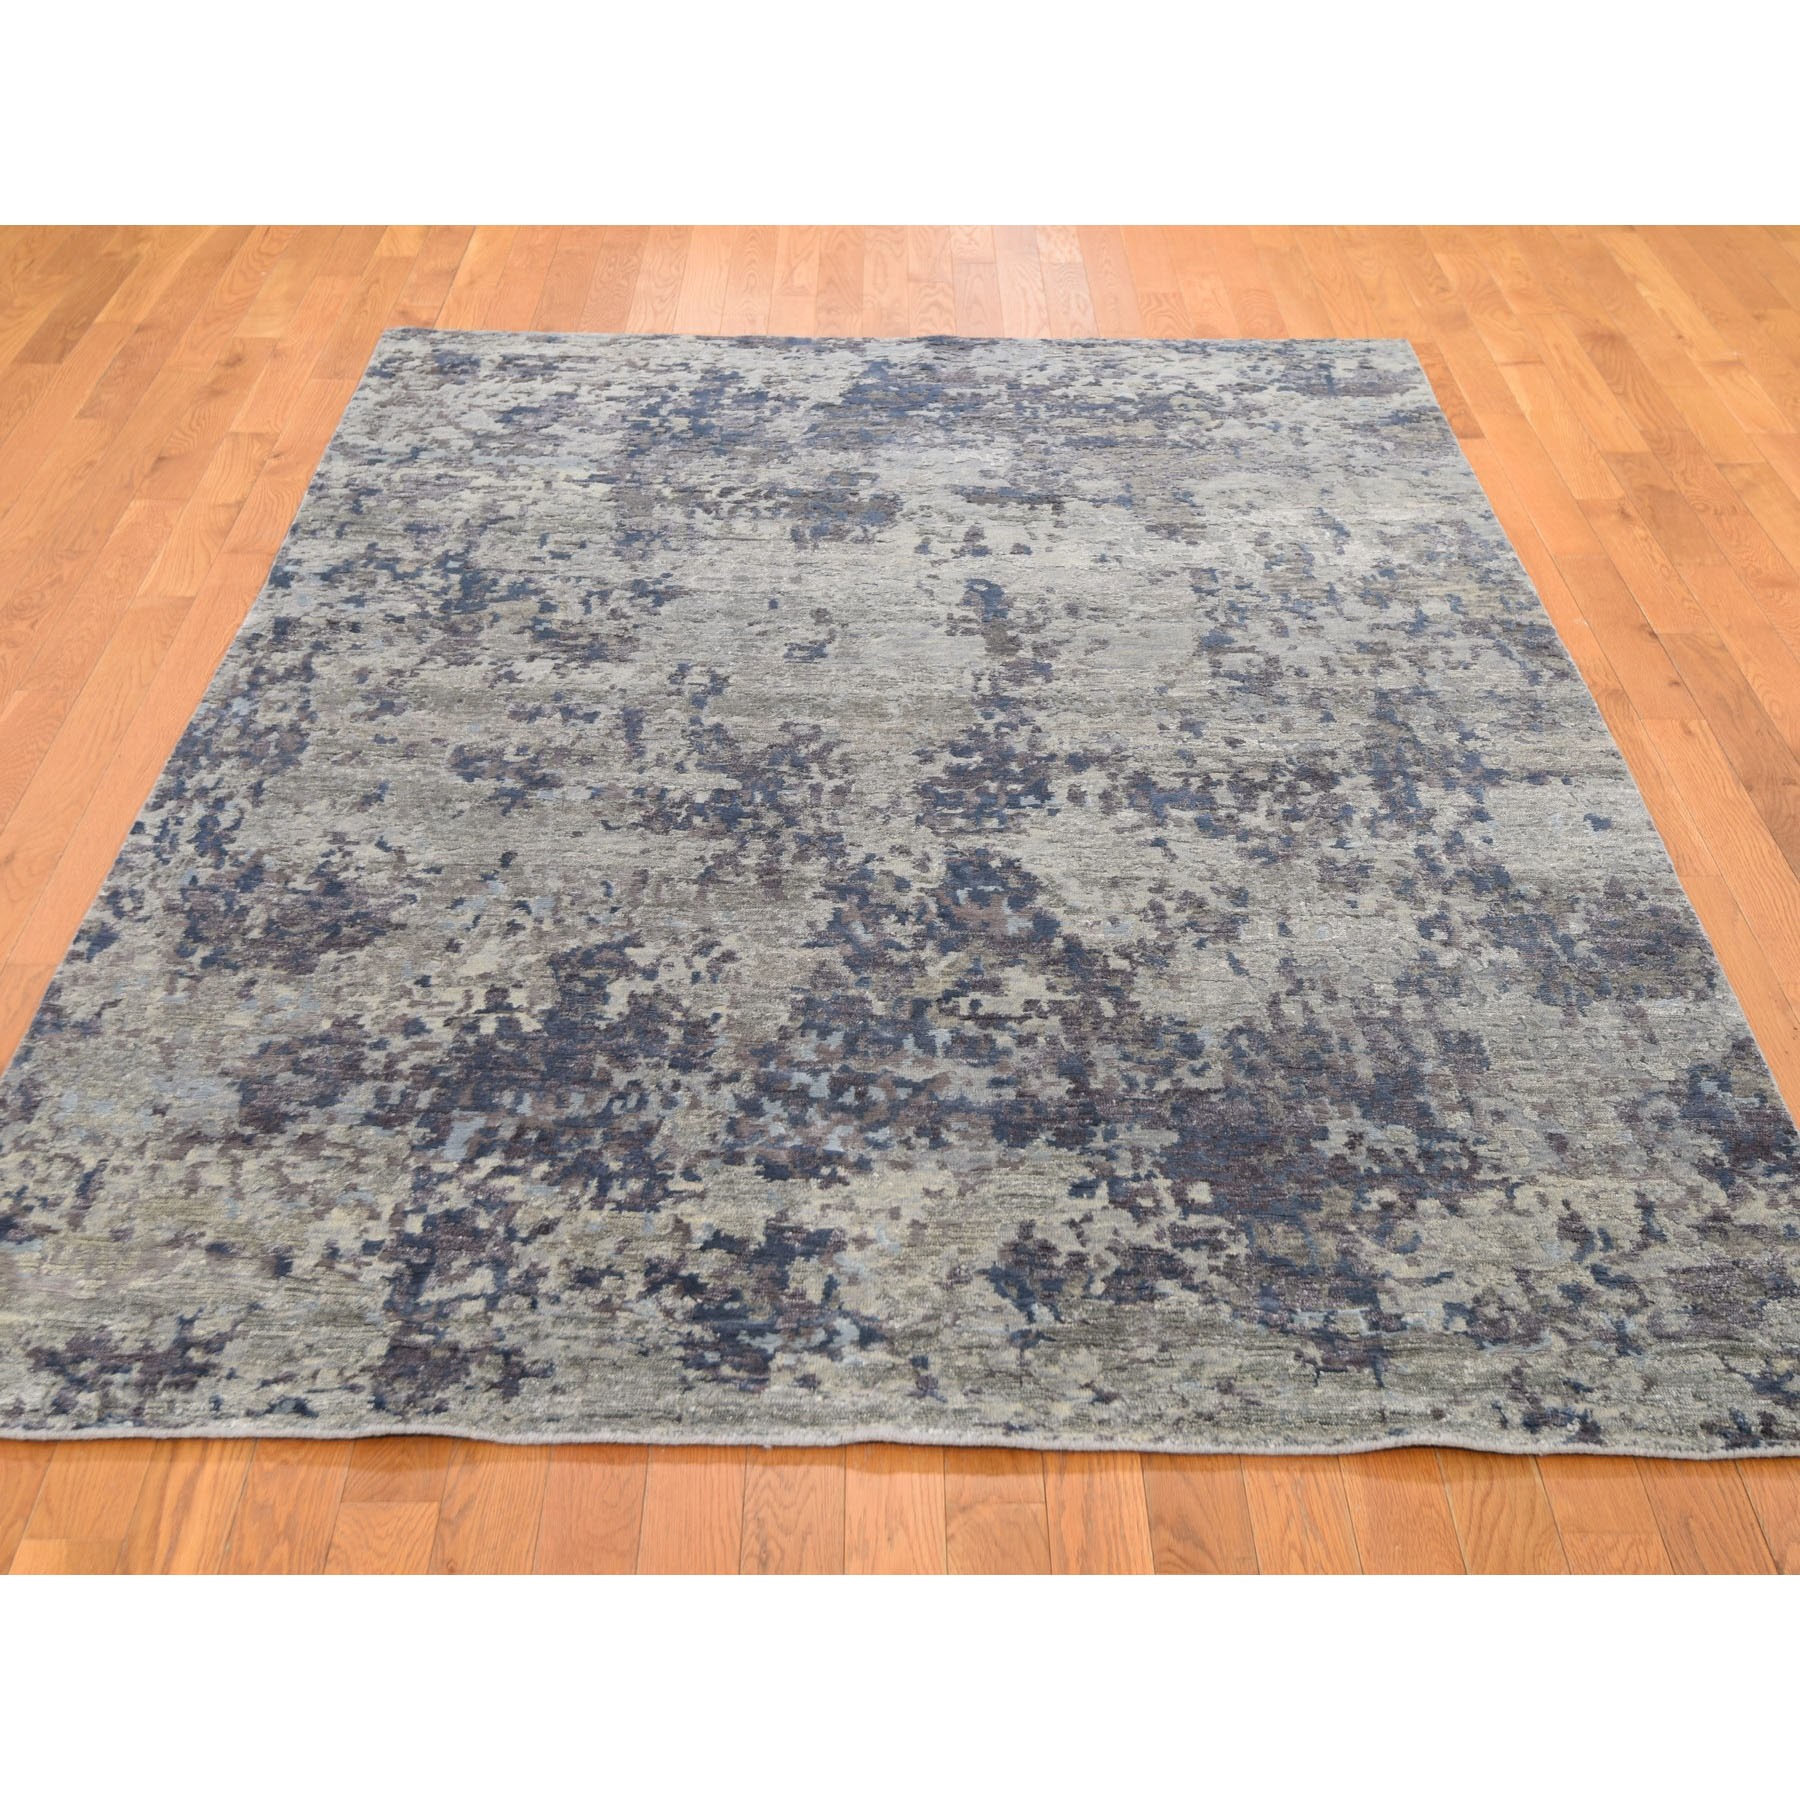 6-x8-10  Hi-Low Pile Abstract Design Wool And Silk Hand Knotted Oriental Rug 